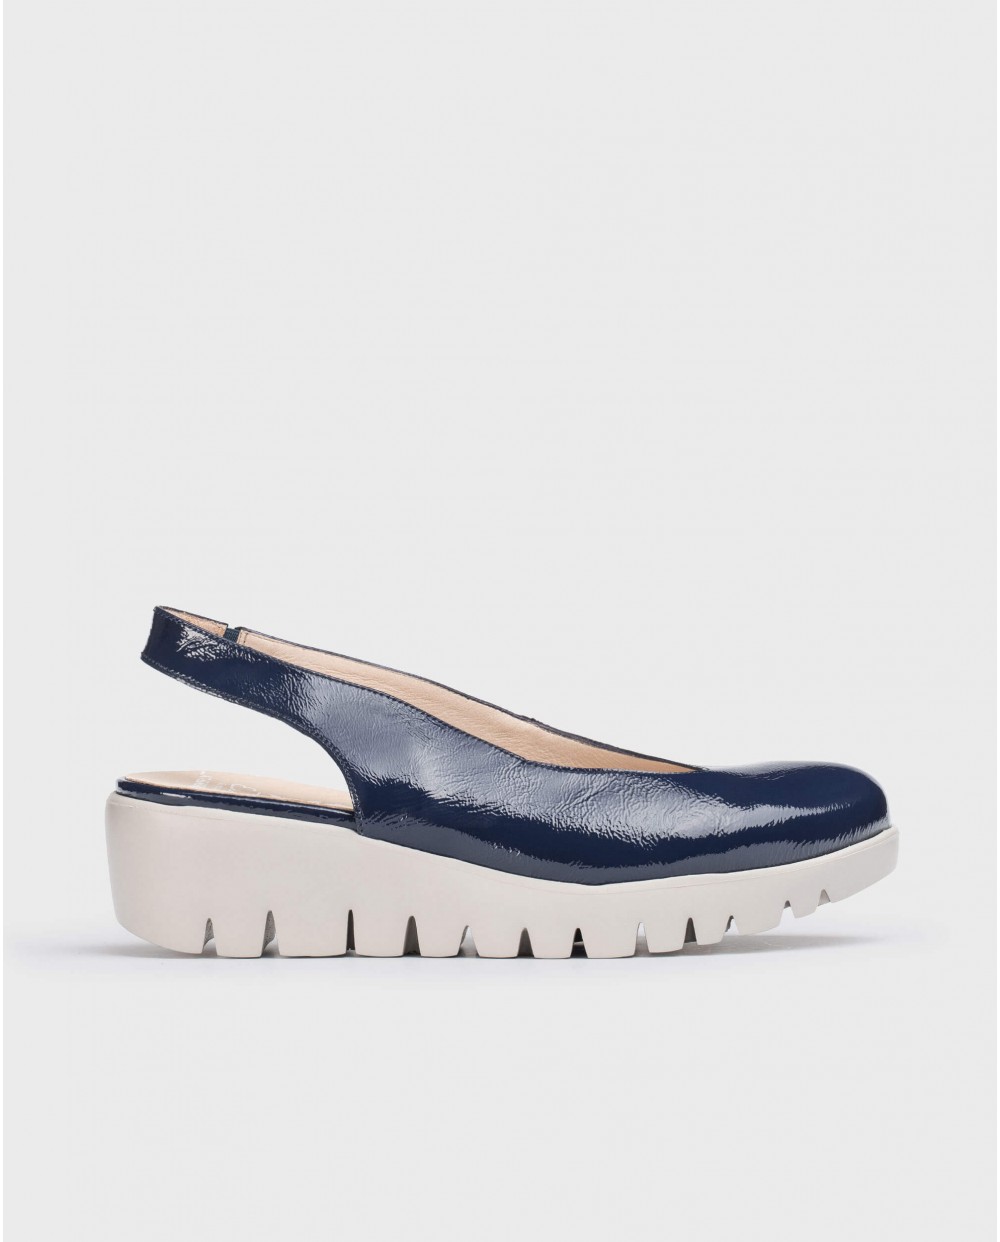 Wonders-Wedges-shoe with an asymmetric throat